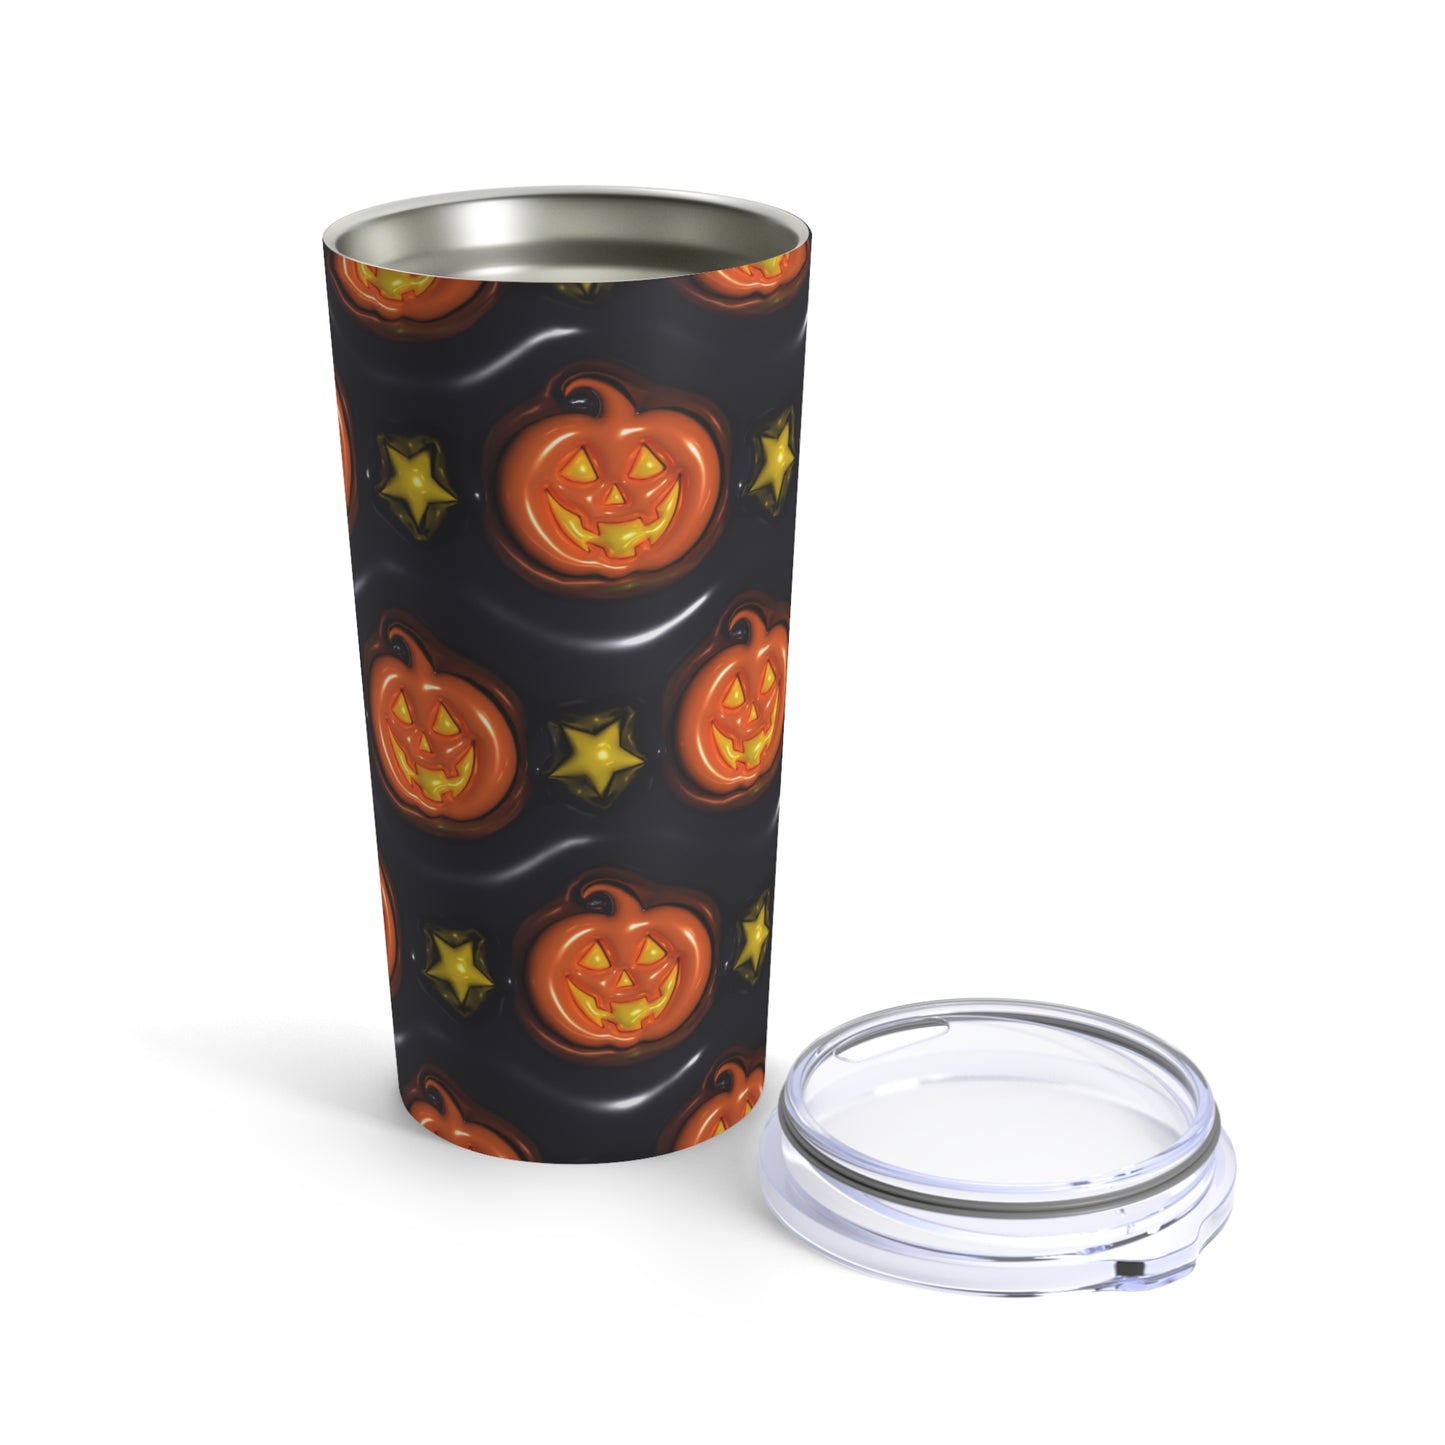 Orange Halloween Pumpkins With Yellow Stars With Black Background 3-D Puffy Halloween by  Mulew Art Tumbler 20oz